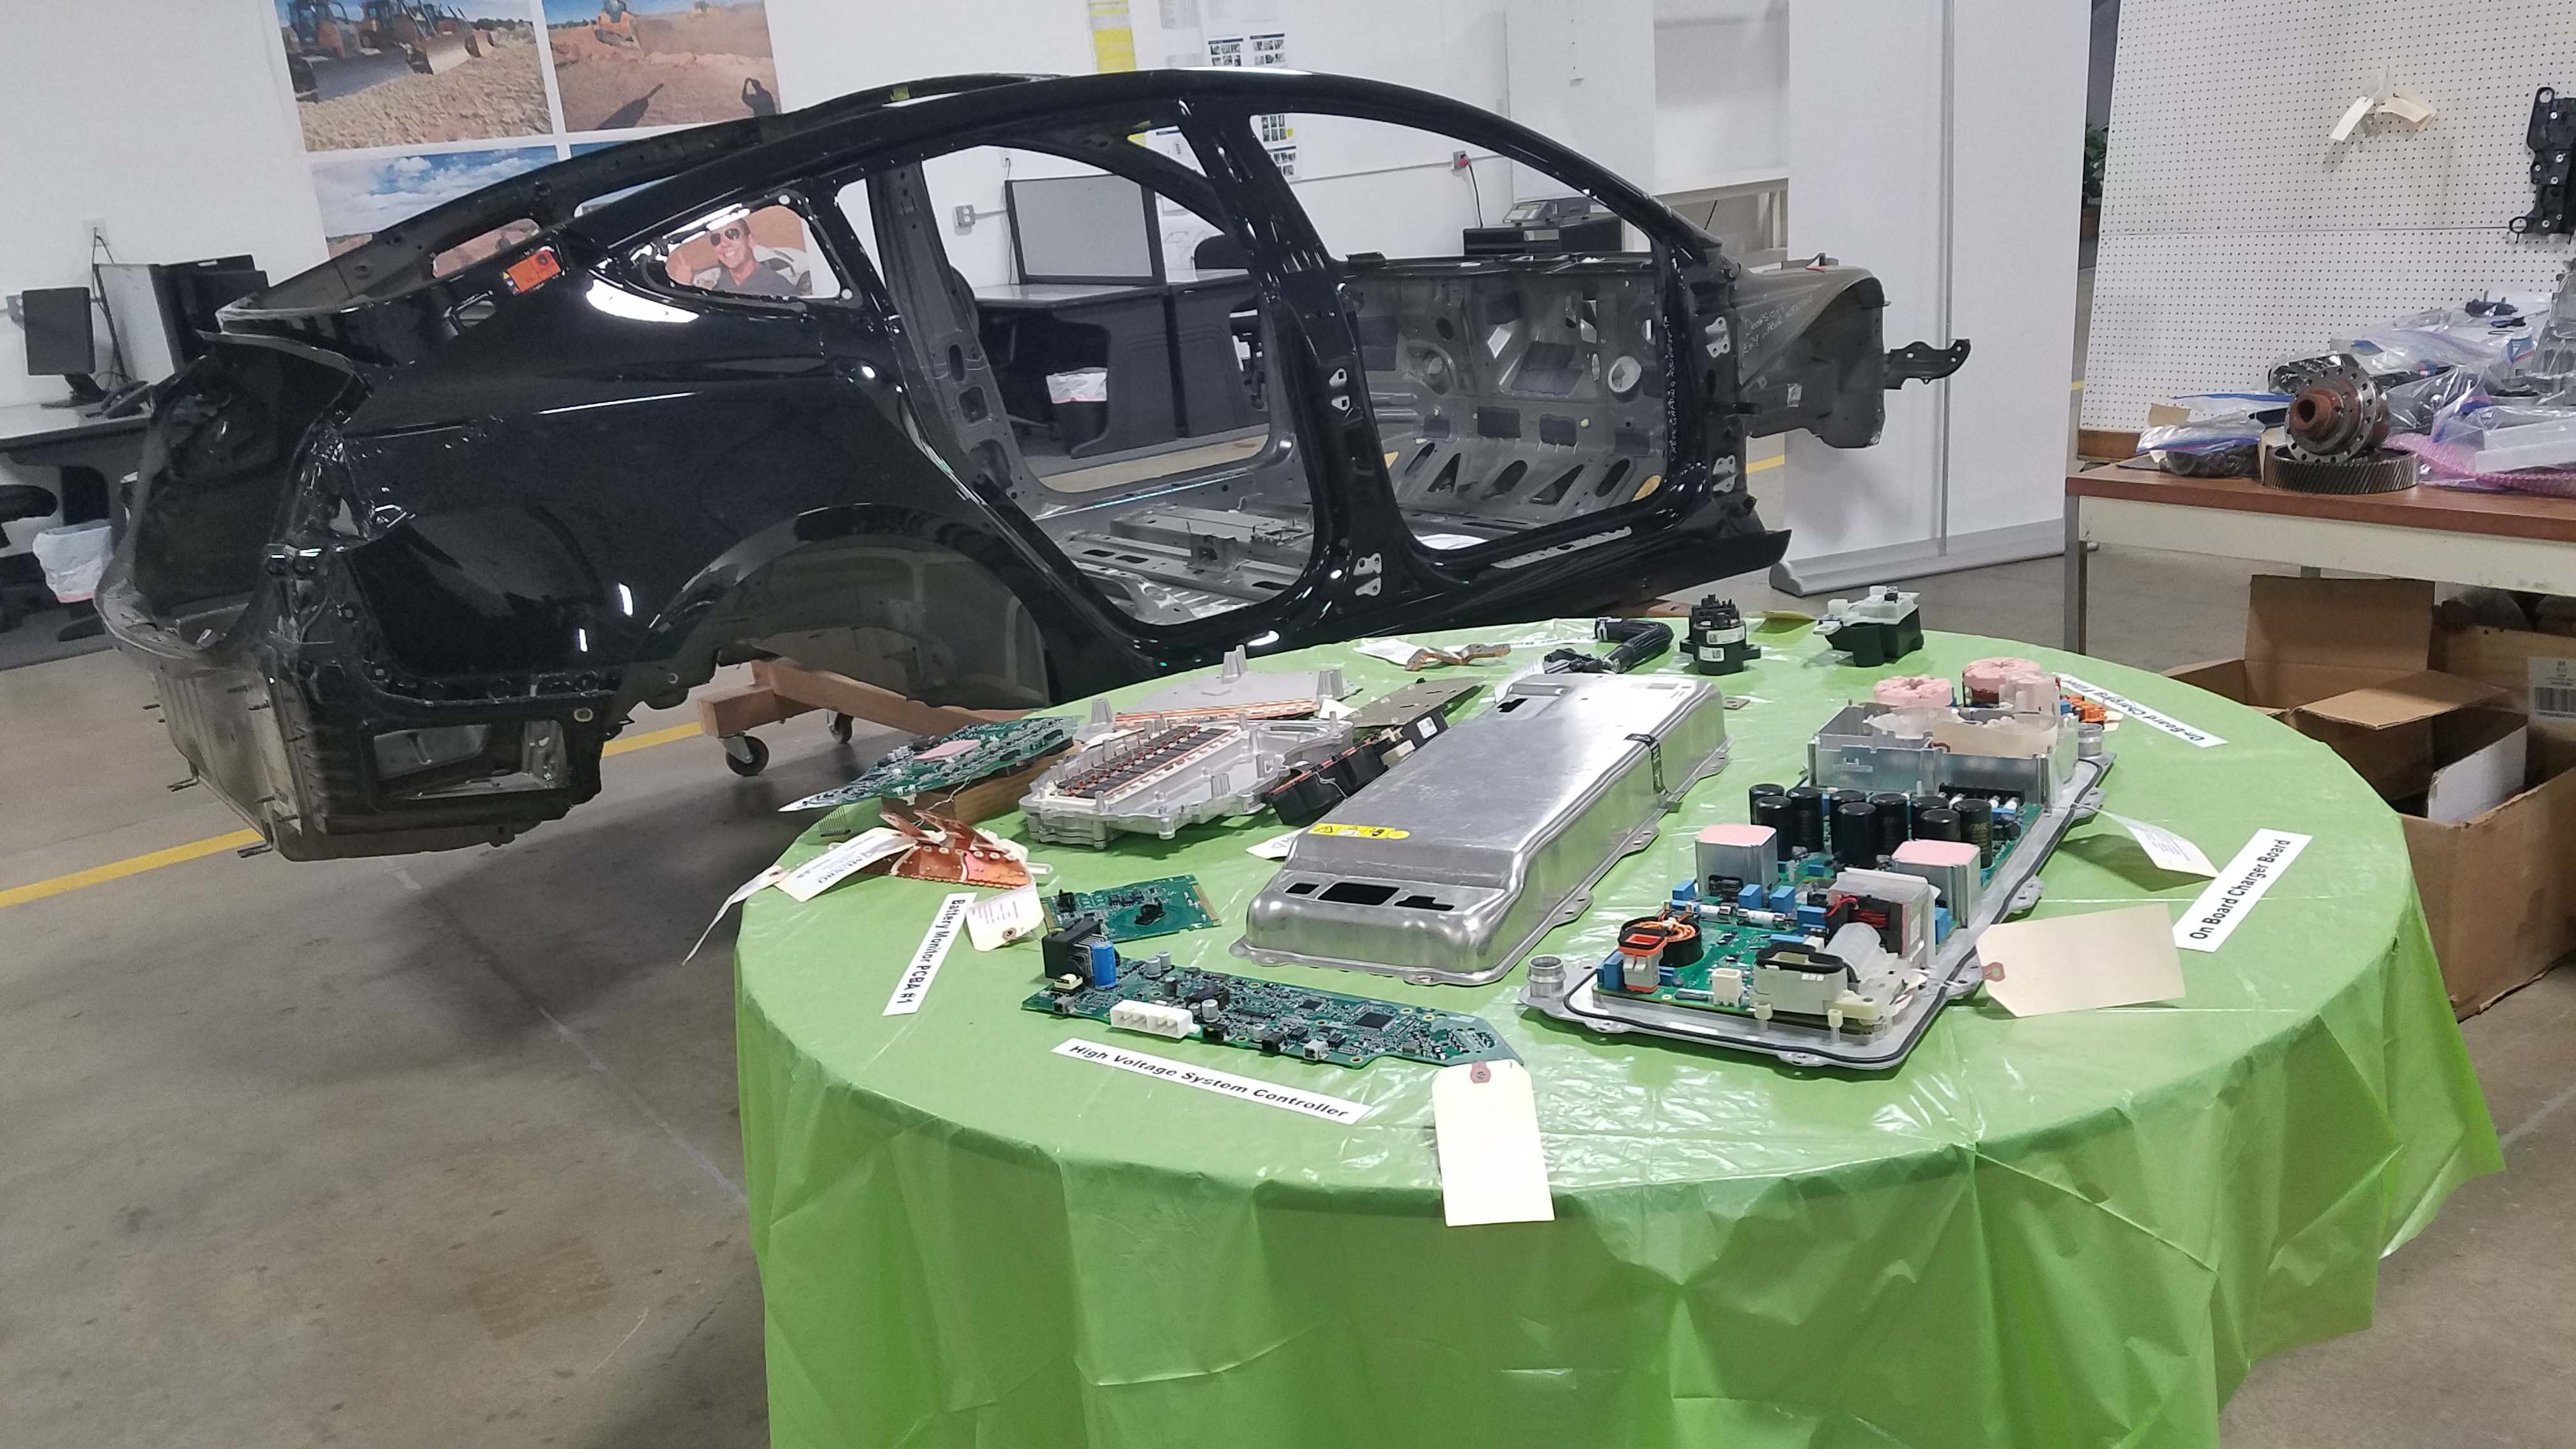 Munro & Assoc. of Auburn Hills dis-assembled a Tesla Model 3 and found its electronic systems (foreground) to be the most-advanced in the auto industry.